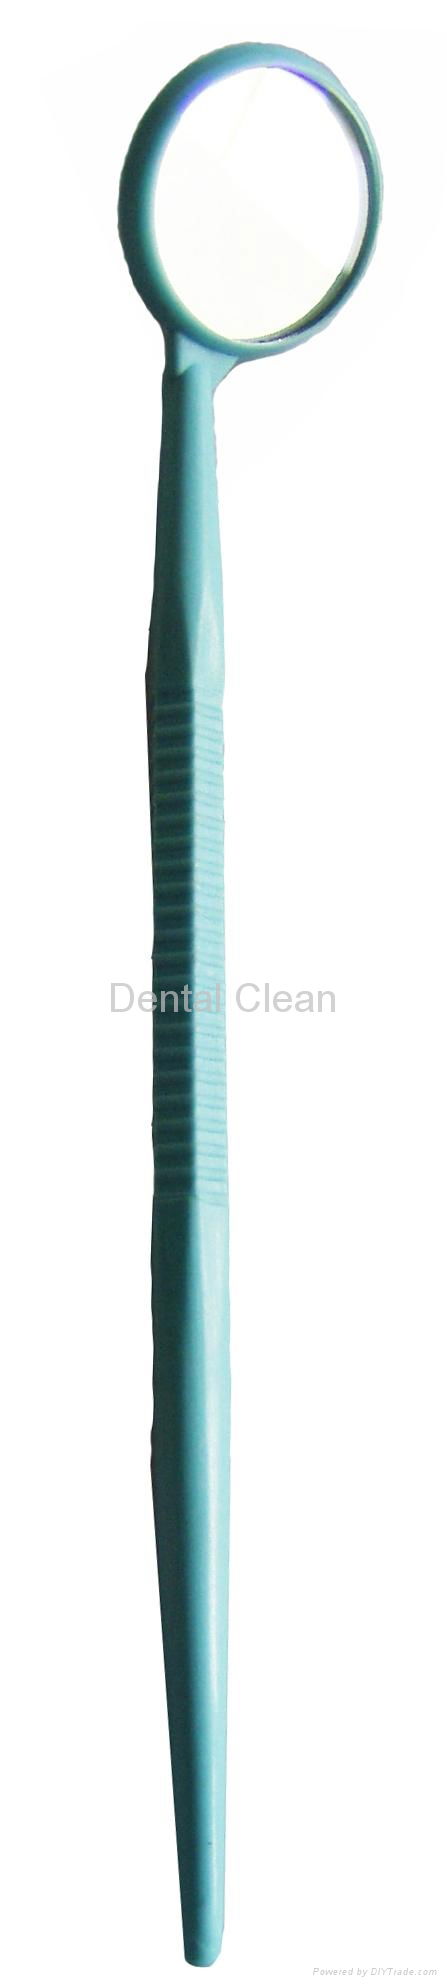 Dental Mirror, Available in Various Colors 5